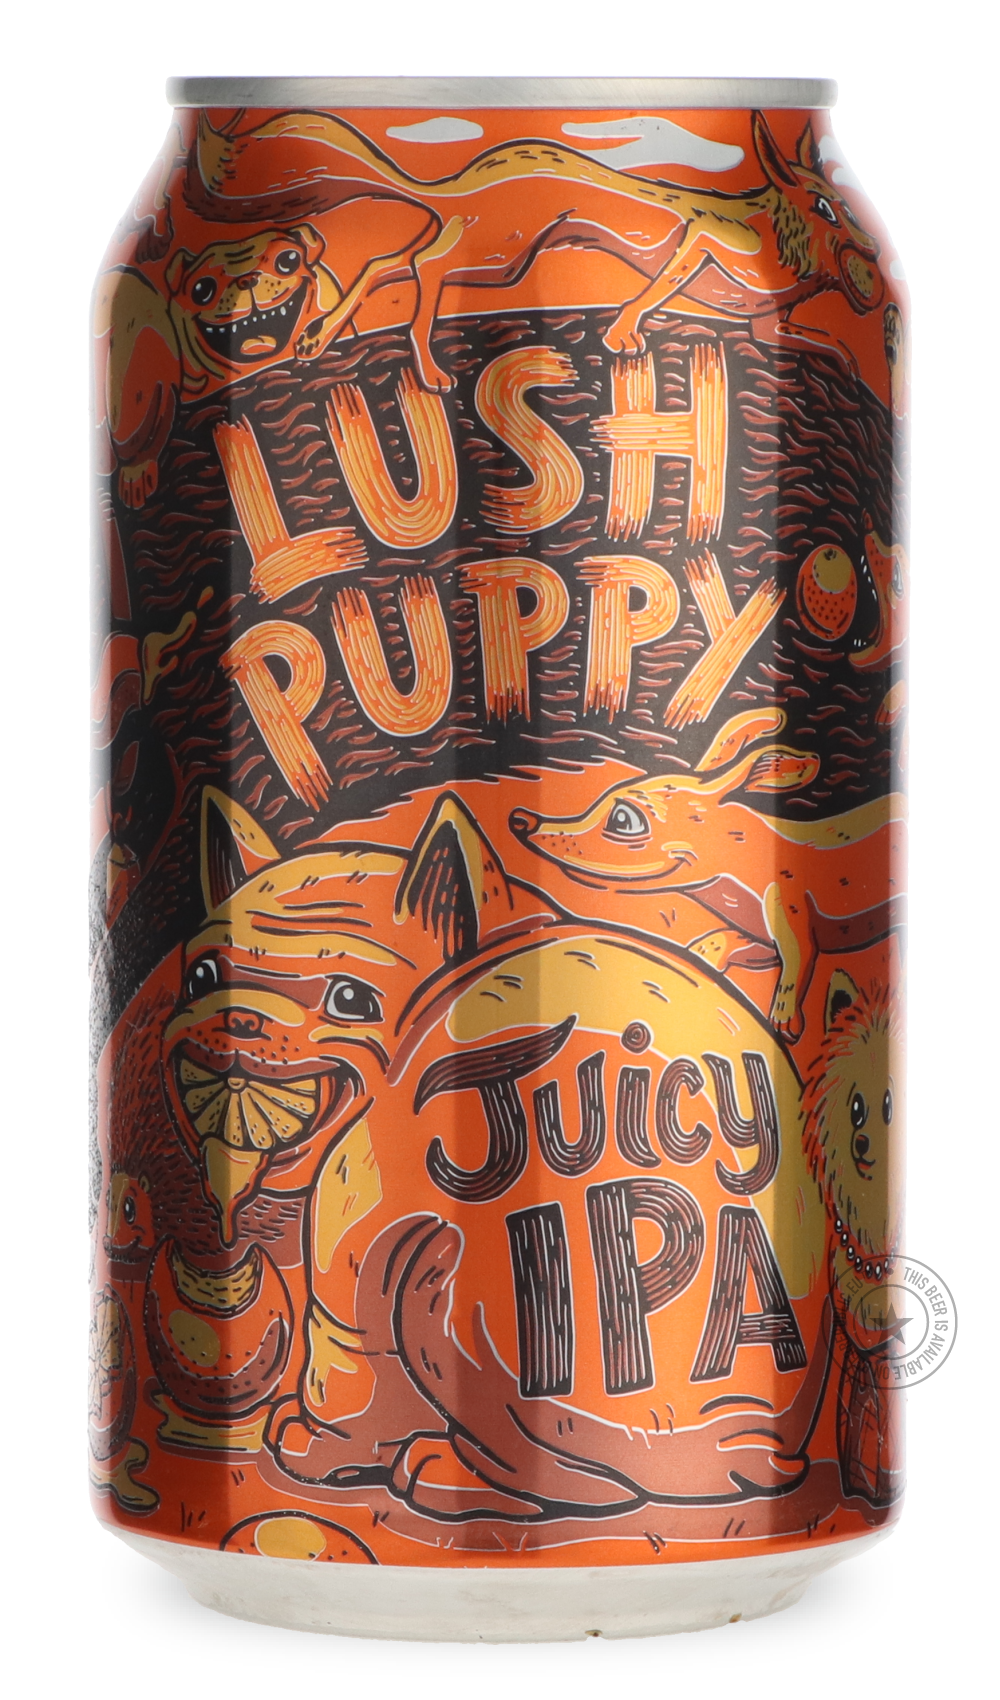 -Bootstrap- Lush Puppy-IPA- Only @ Beer Republic - The best online beer store for American & Canadian craft beer - Buy beer online from the USA and Canada - Bier online kopen - Amerikaans bier kopen - Craft beer store - Craft beer kopen - Amerikanisch bier kaufen - Bier online kaufen - Acheter biere online - IPA - Stout - Porter - New England IPA - Hazy IPA - Imperial Stout - Barrel Aged - Barrel Aged Imperial Stout - Brown - Dark beer - Blond - Blonde - Pilsner - Lager - Wheat - Weizen - Amber - Barley Win